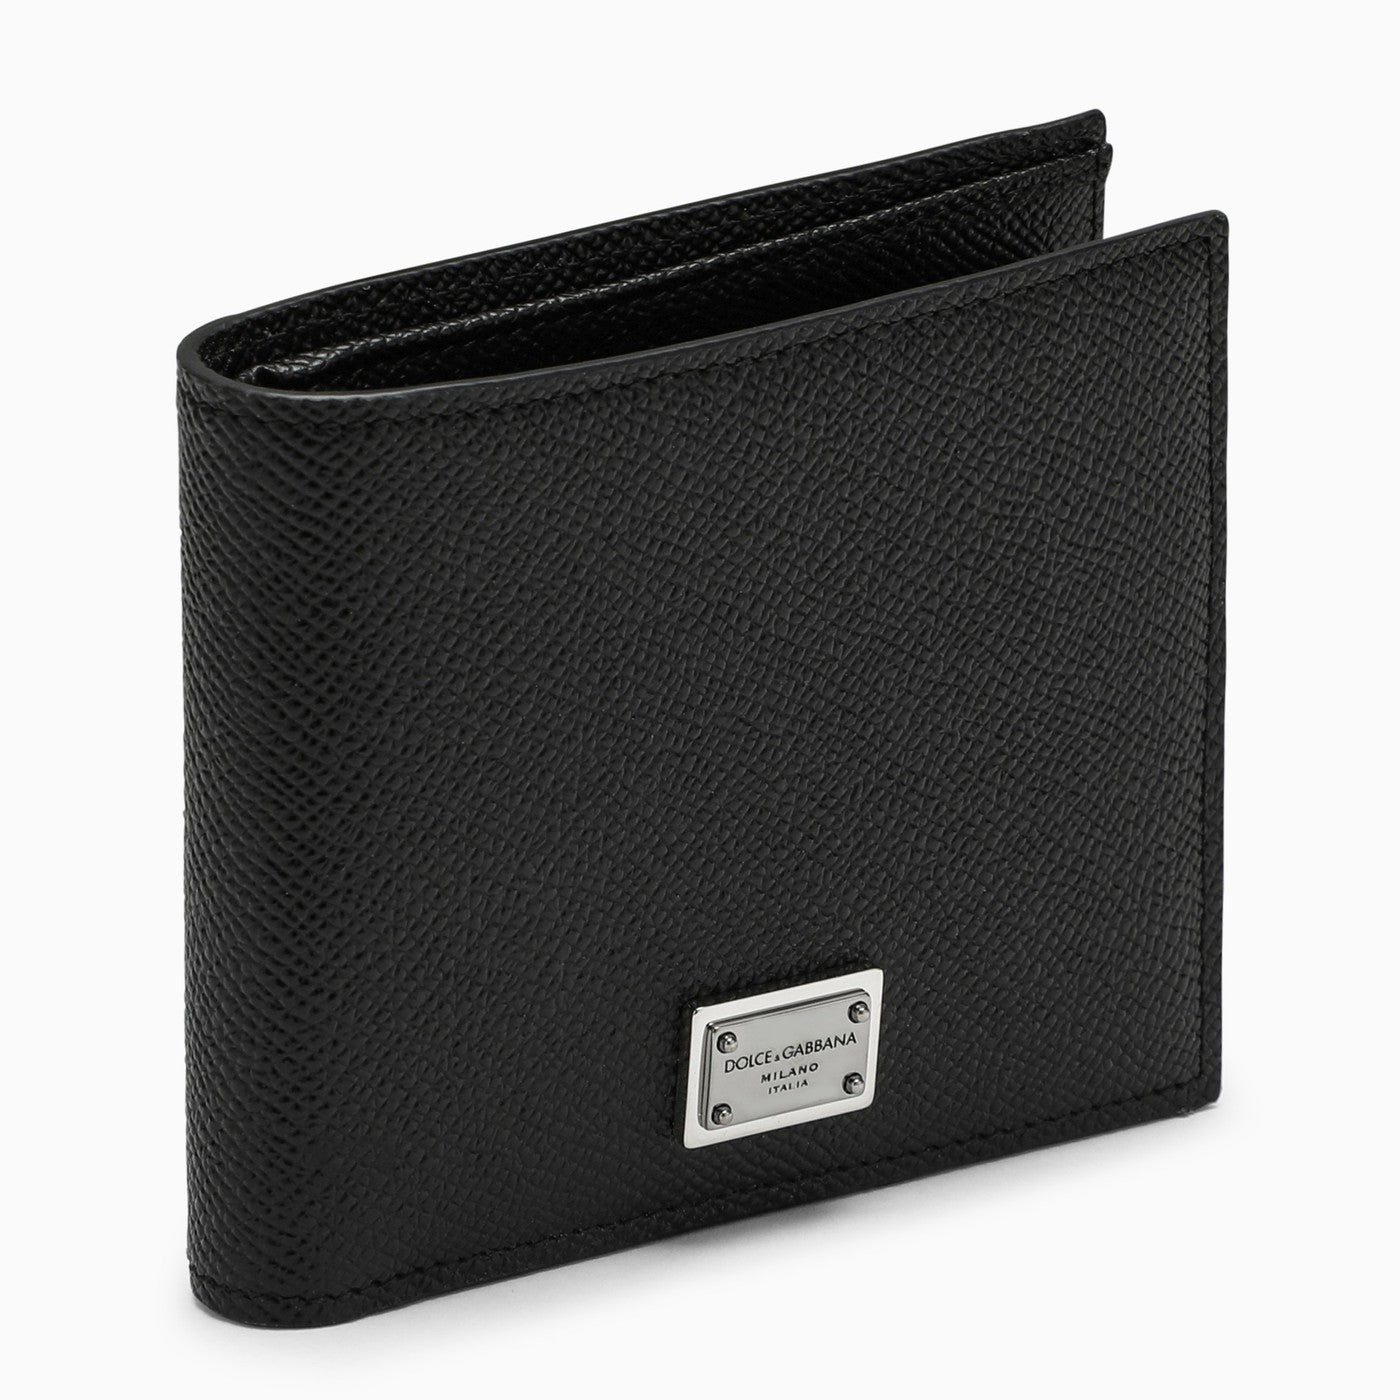 Men's Louis Vuitton Wallets and cardholders from A$399